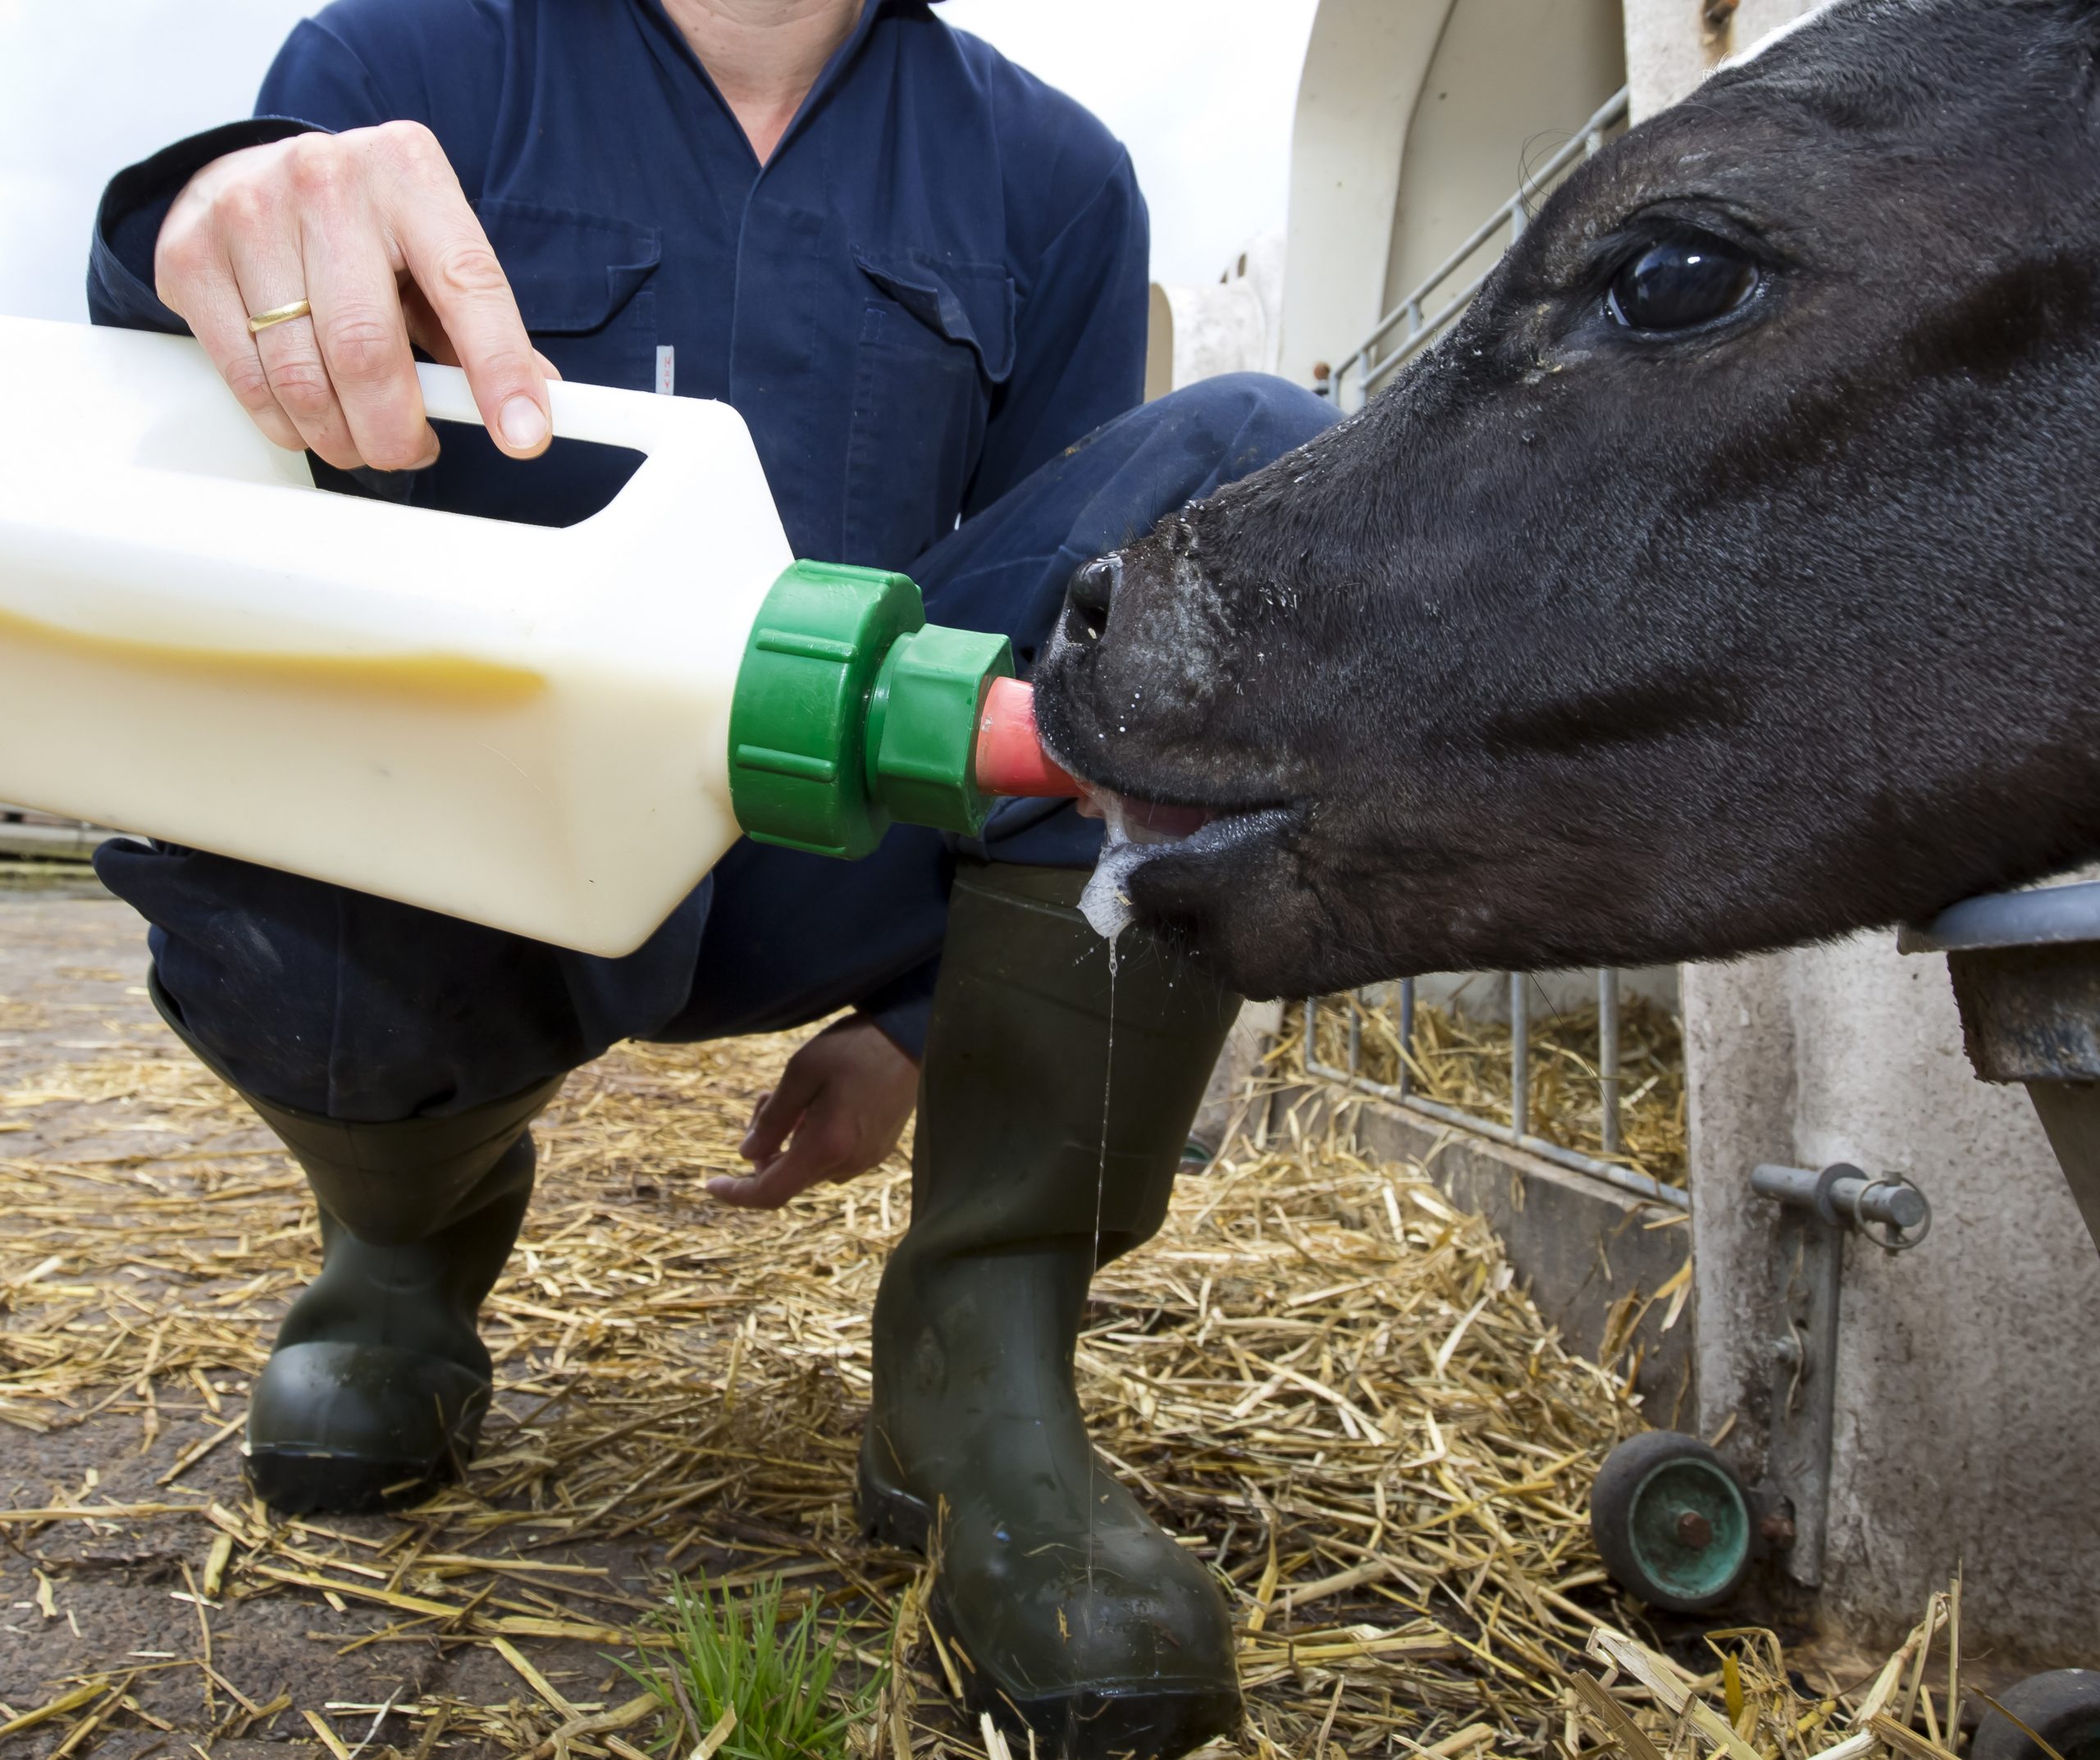 UK to promote right use of colostrum. Photo: Ruud Ploeg